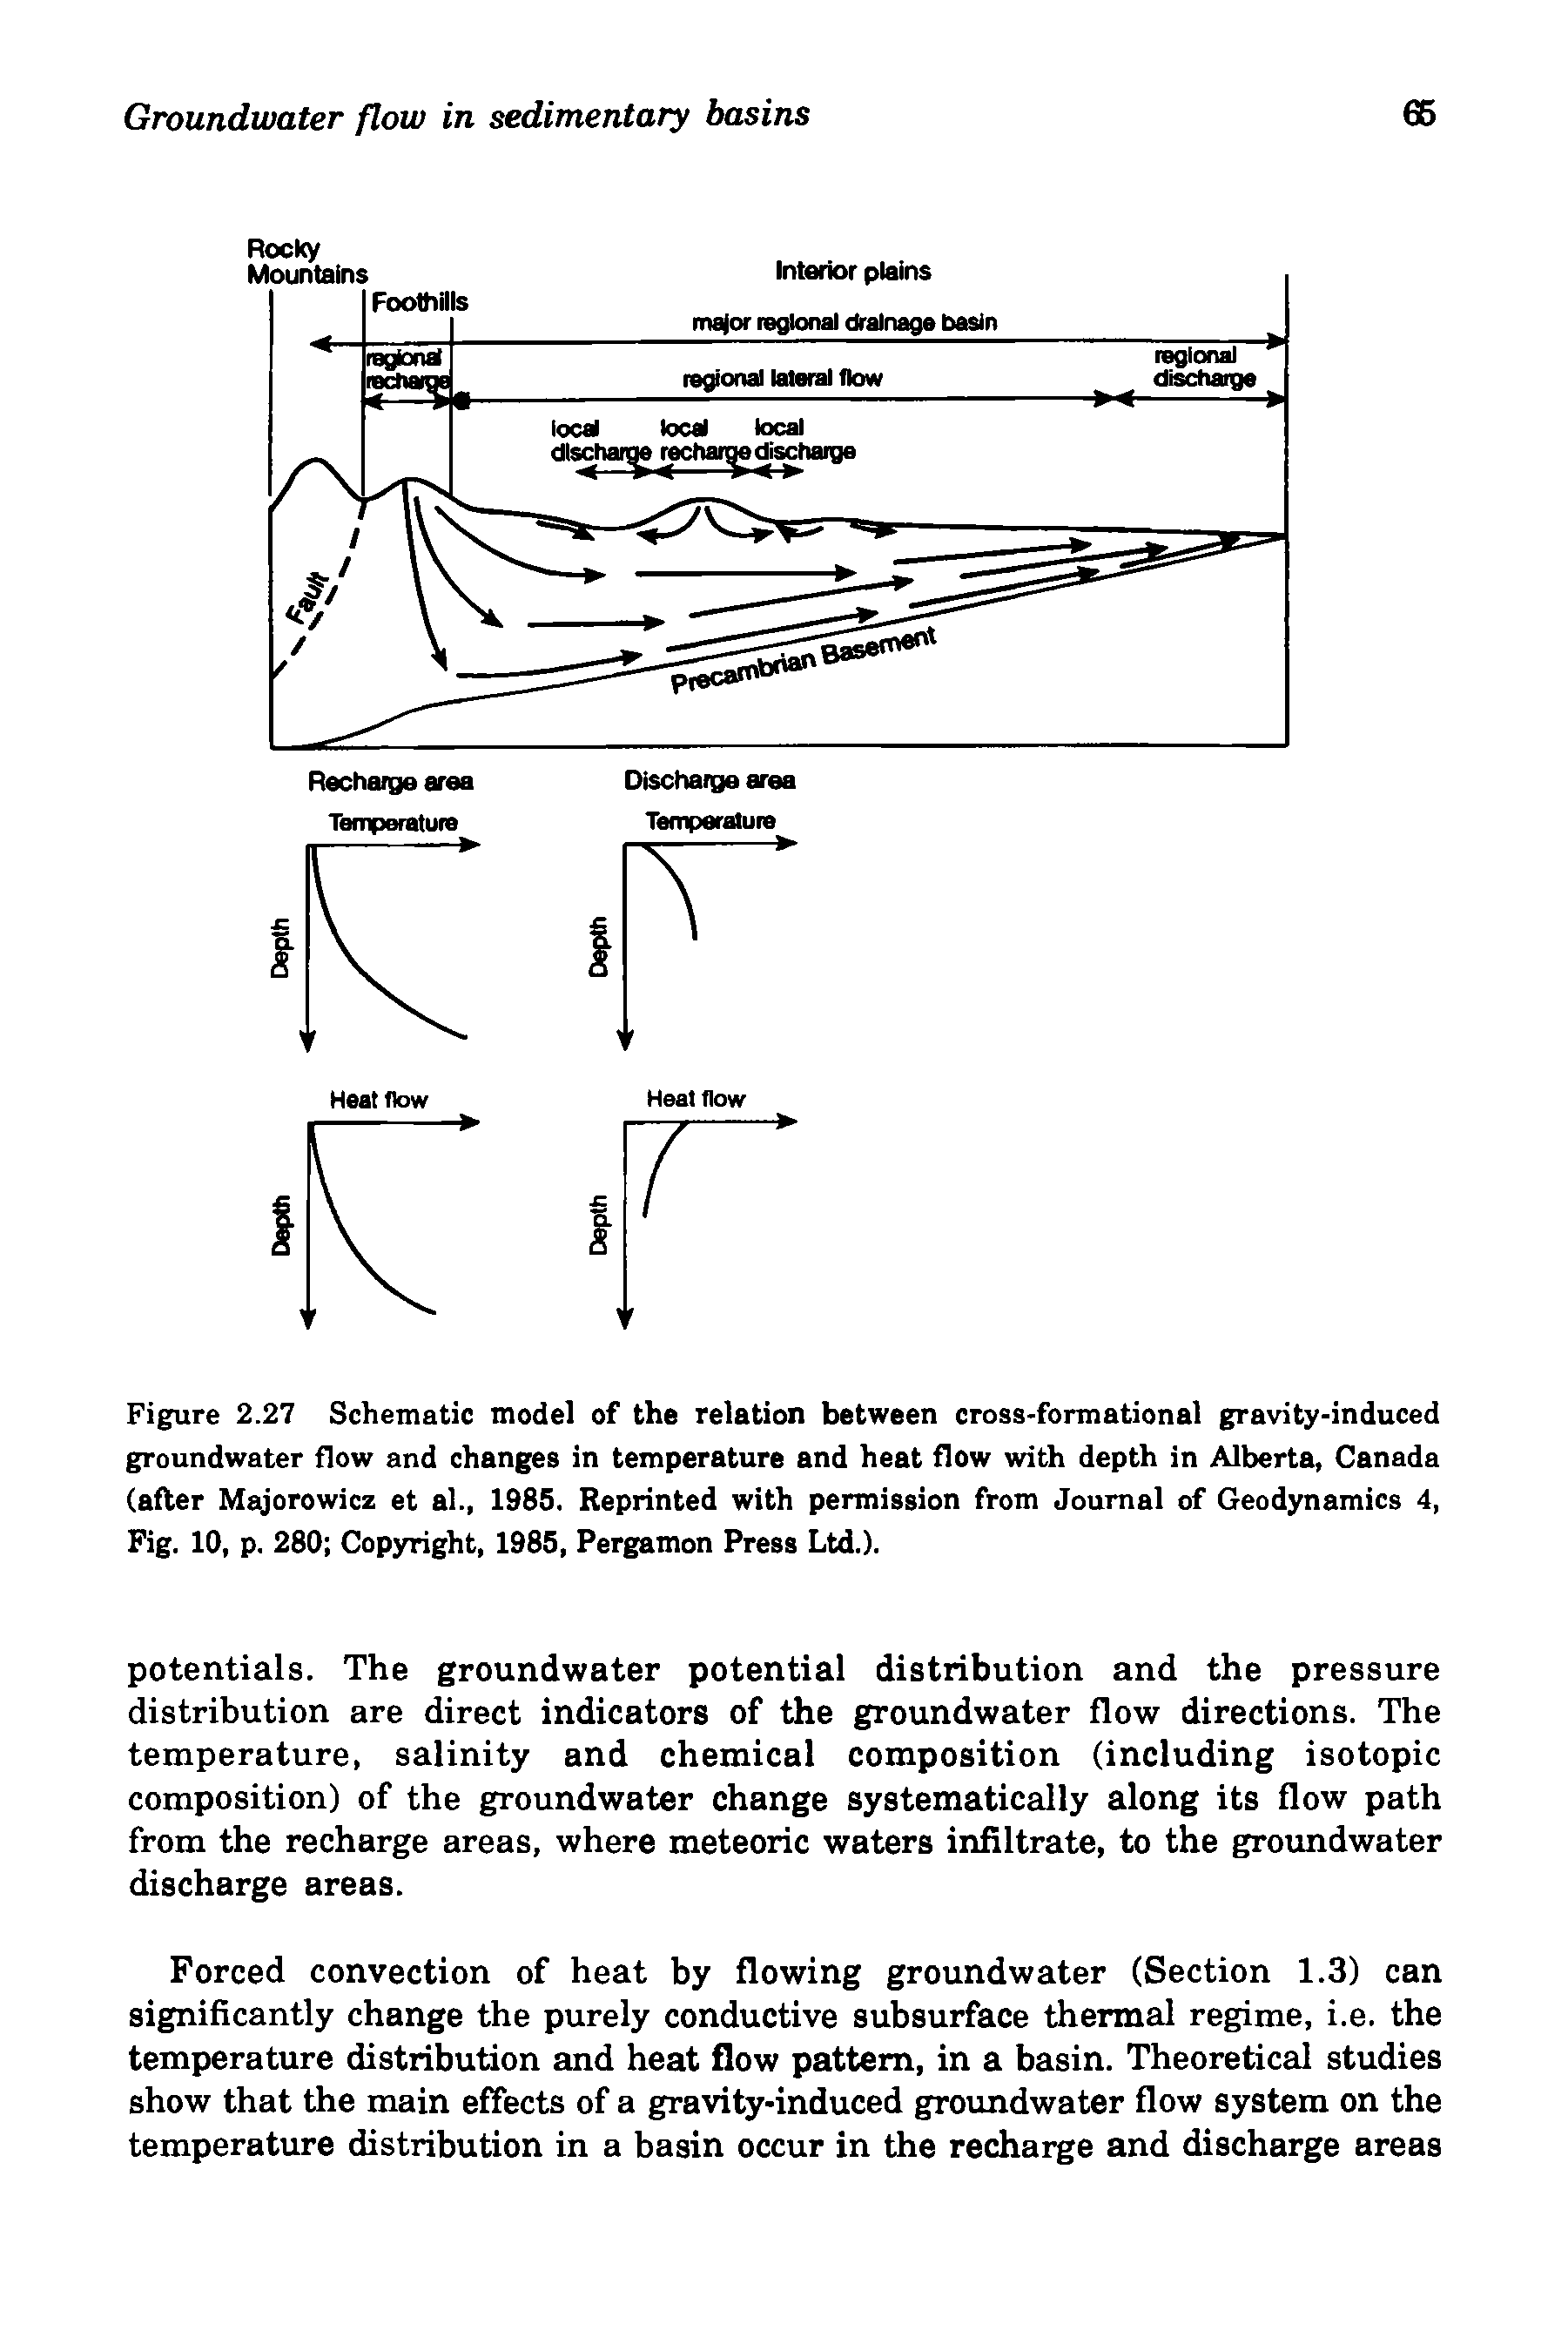 Figure 2.27 Schematic model of the relation between cross-formational gravity-induced groundwater flow and changes in temperature and heat flow with depth in Alberta, Canada (after M orowicz et al., 1985. Reprinted with permission from Journal of Geodynamics 4, Fig. 10, p. 280 Copyright, 1985, Pergamon Press Ltd.).